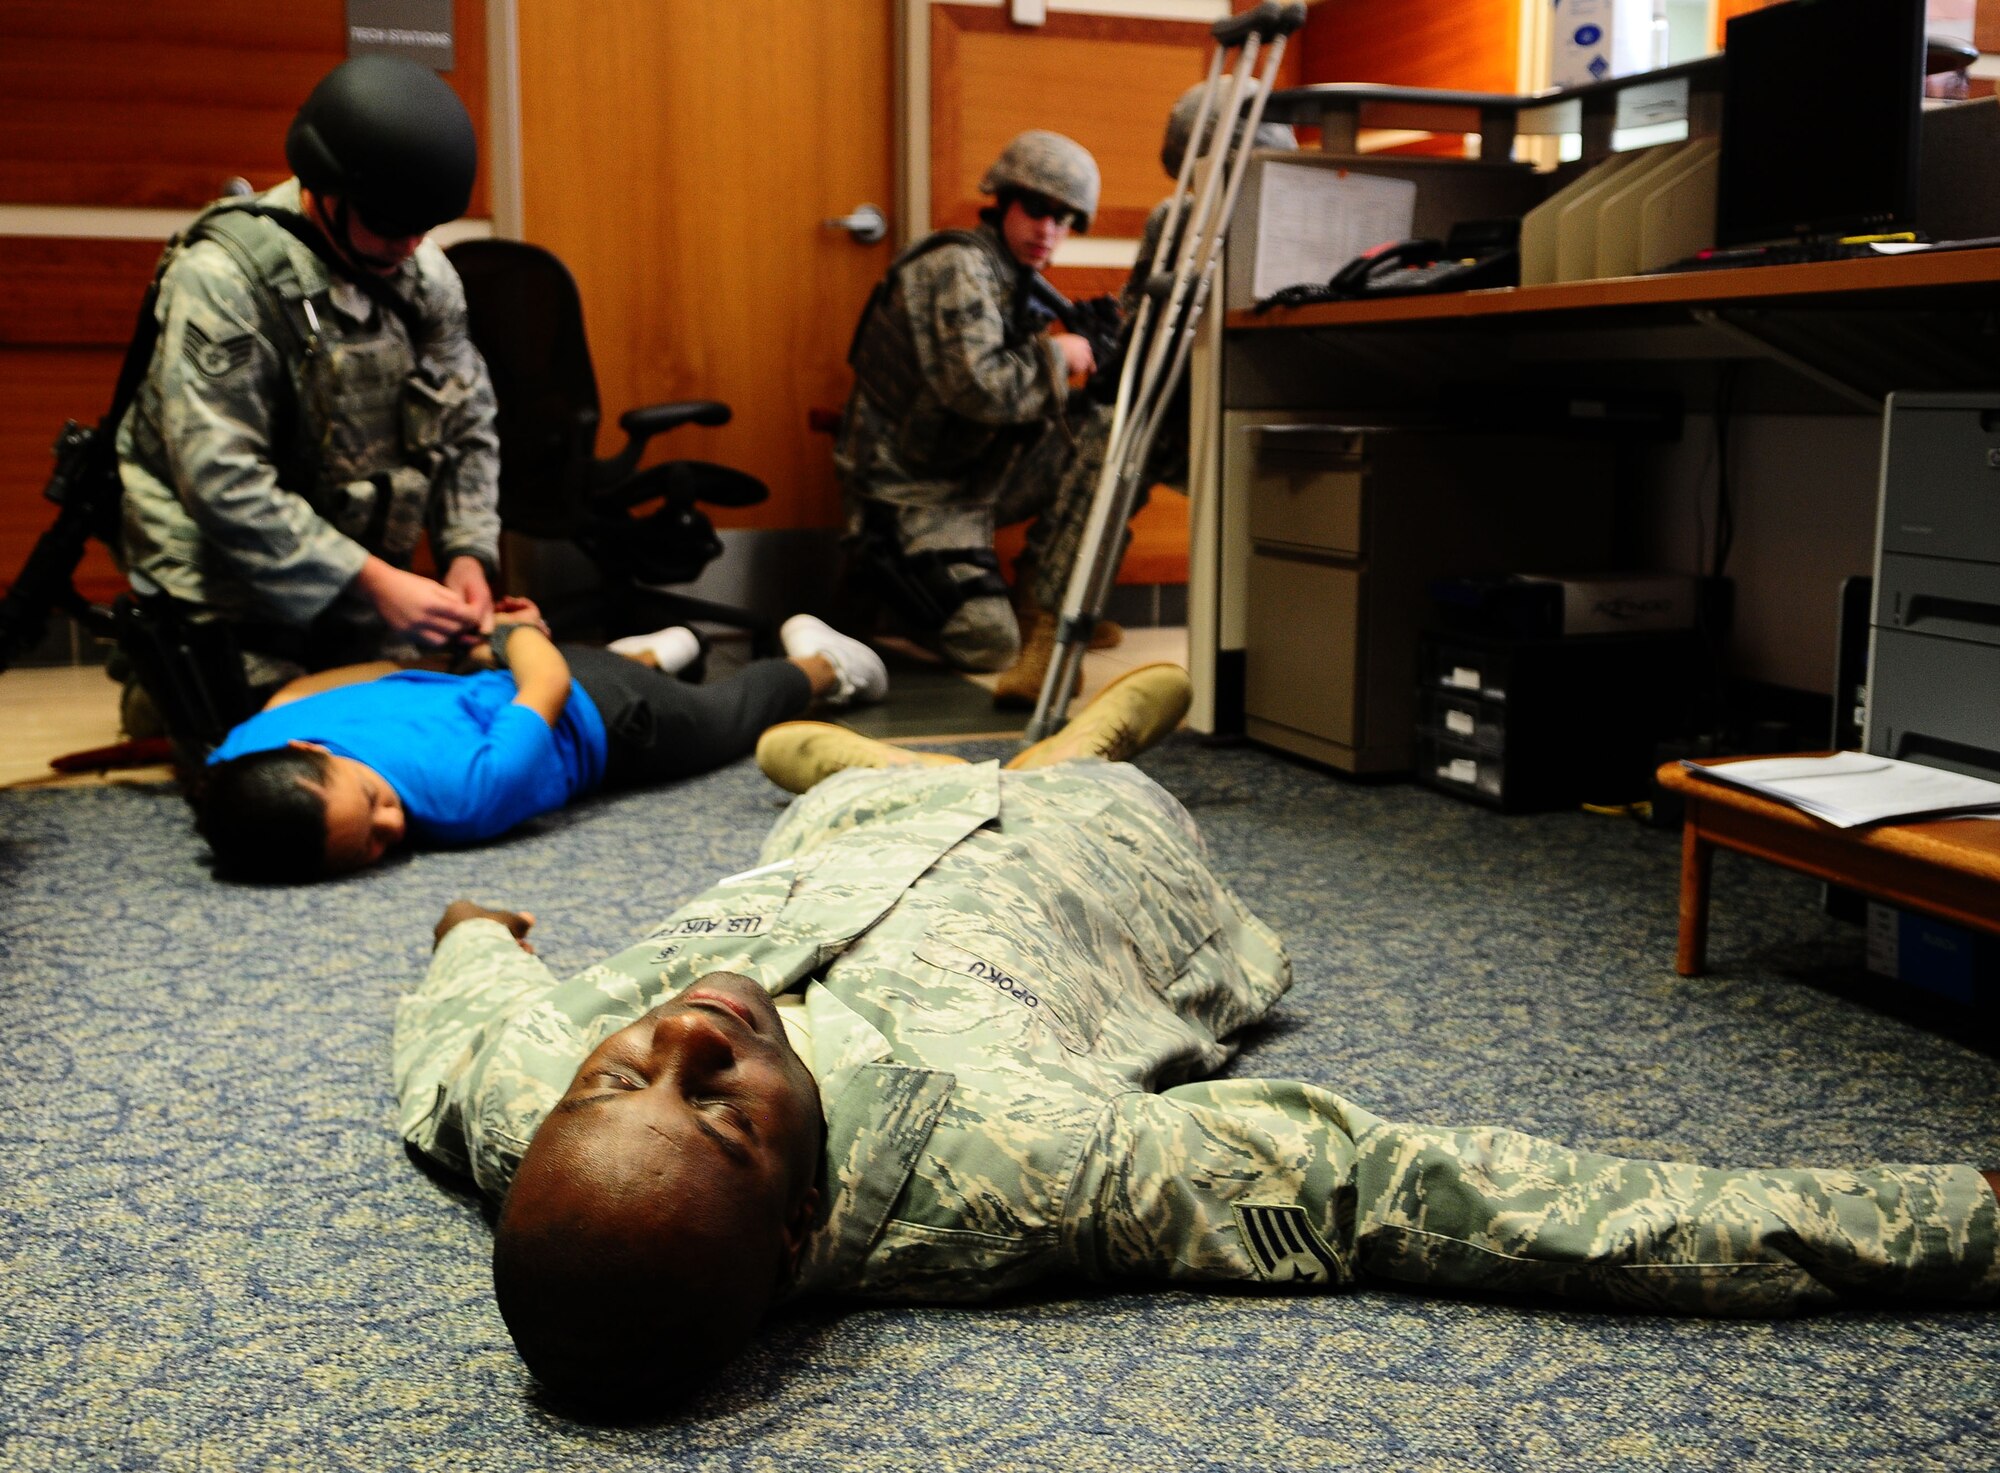 Airmen from the 36th Security Forces Squadron subdue an assailant and secure the 36th Medical Group building during an active shooter exercise at Andersen Air Force Base, Jan. 12. The exercise tested first responders as well as medical group personnel on their response in the event of an active shooter. (U.S. Air Force photo/Airman 1st Class Jeffrey Schultze) 